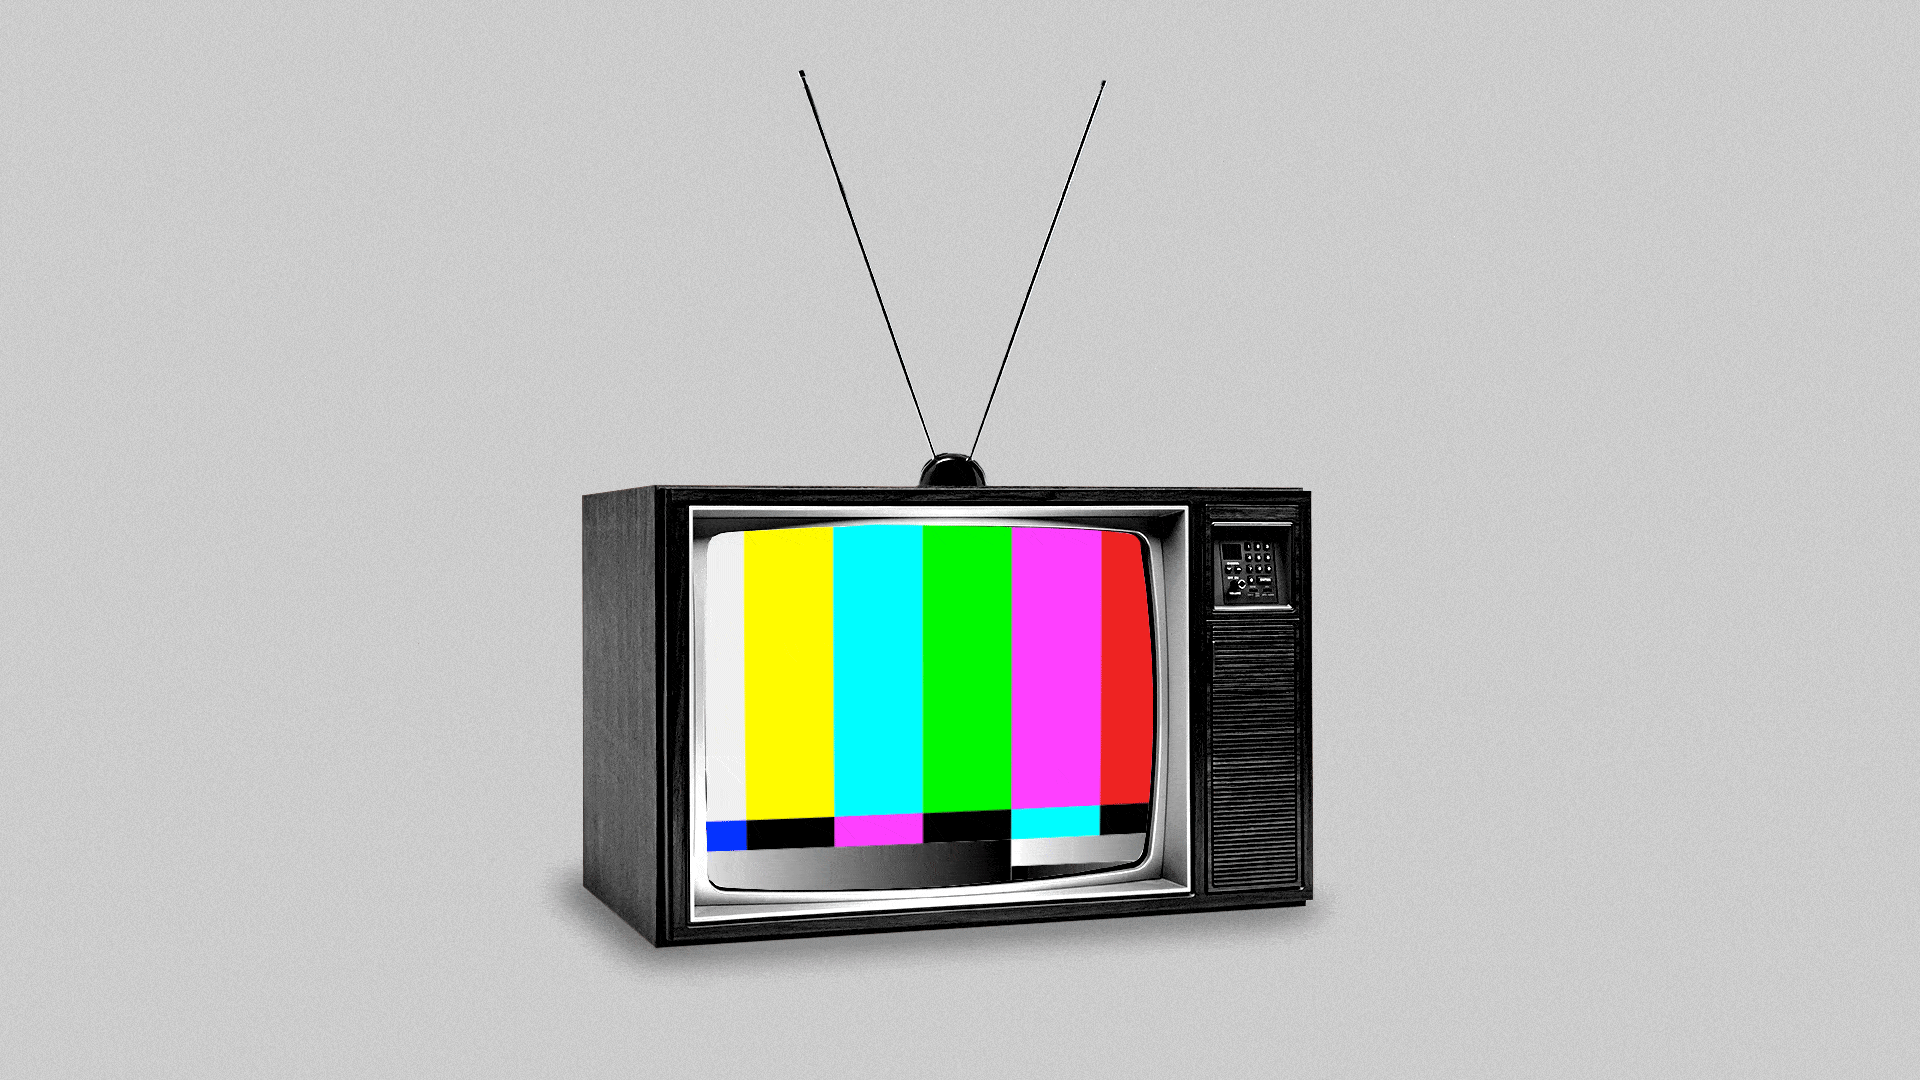 Animated illustration of a television with it's antennae drooping down on either side.